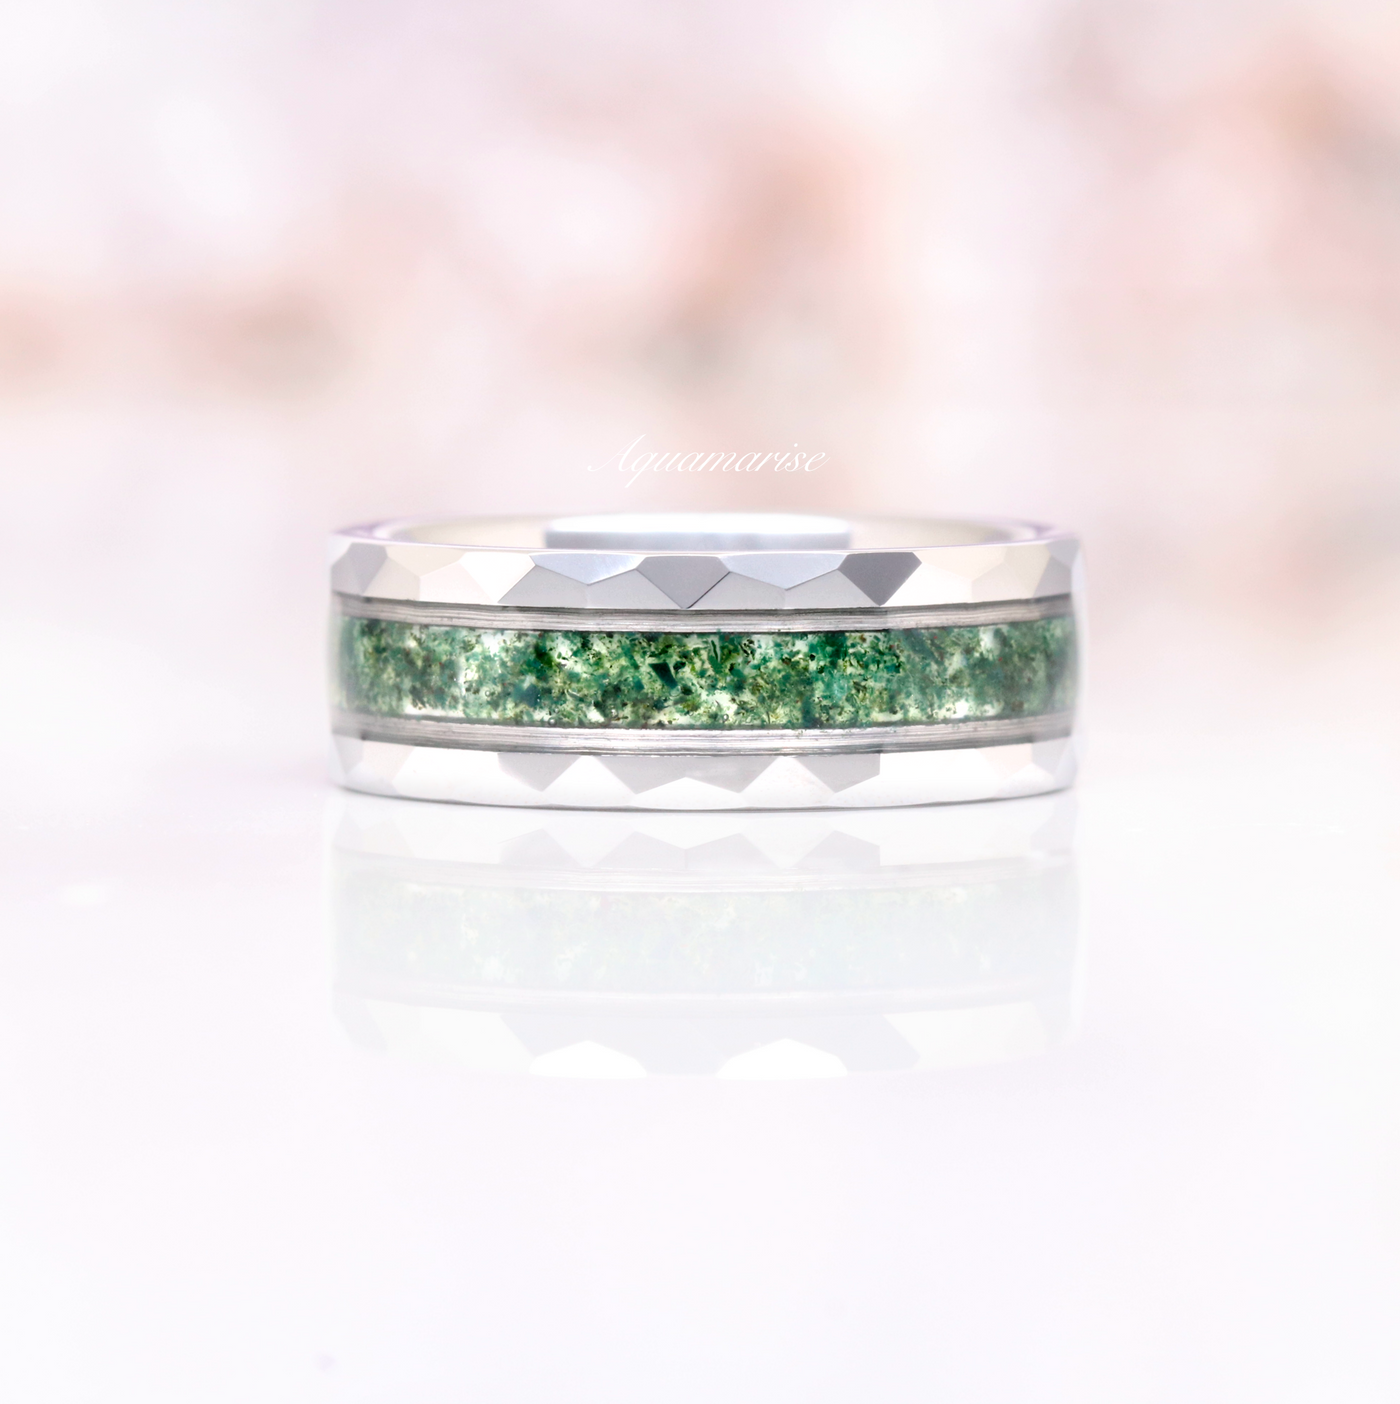 Green Moss Agate Hammered Men's Wedding Band- Natural Crushed Agate Silver Tungsten 8mm Wedding Band Polished Comfort Fit Ring Gift For Him